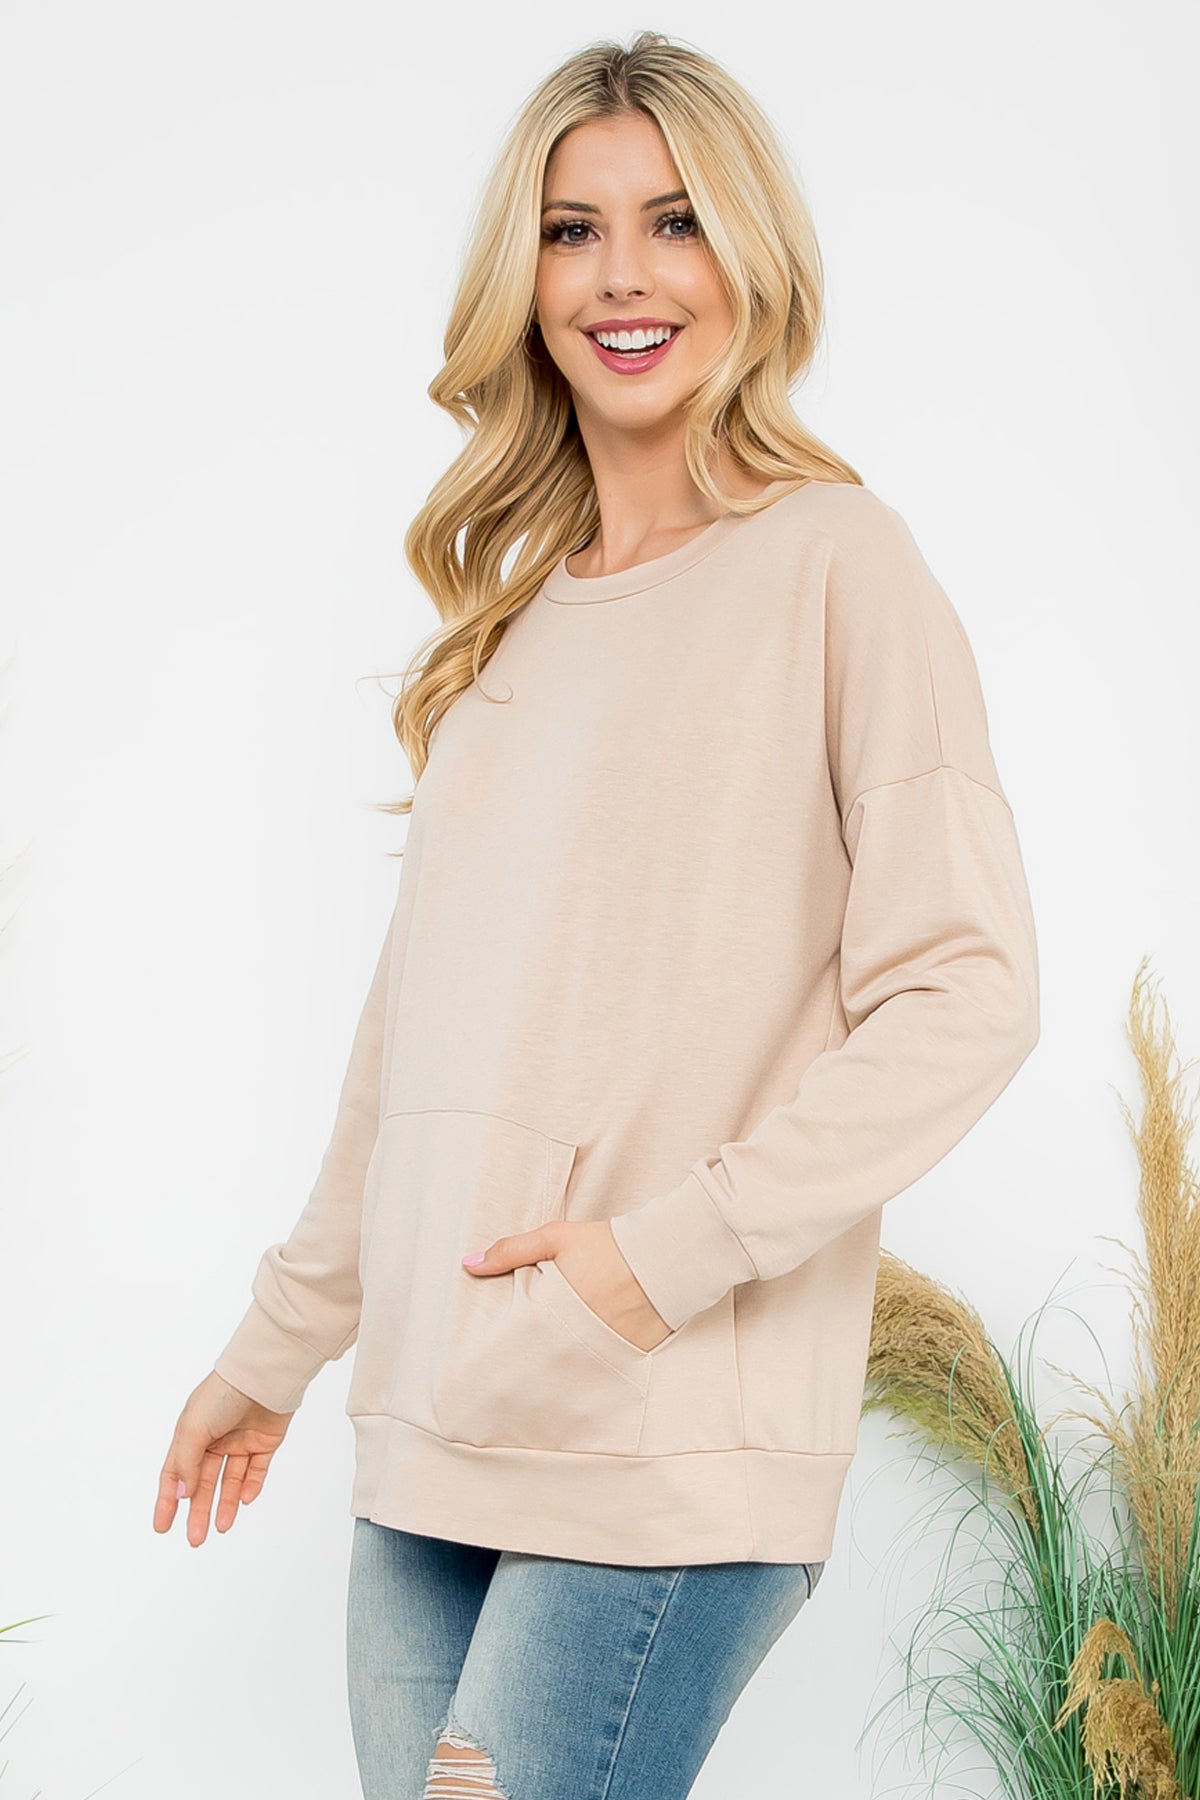 LONG SLEEVE FRENCH TERRY TOP WITH KANGAROO POCKET TOP 1-1-1-1